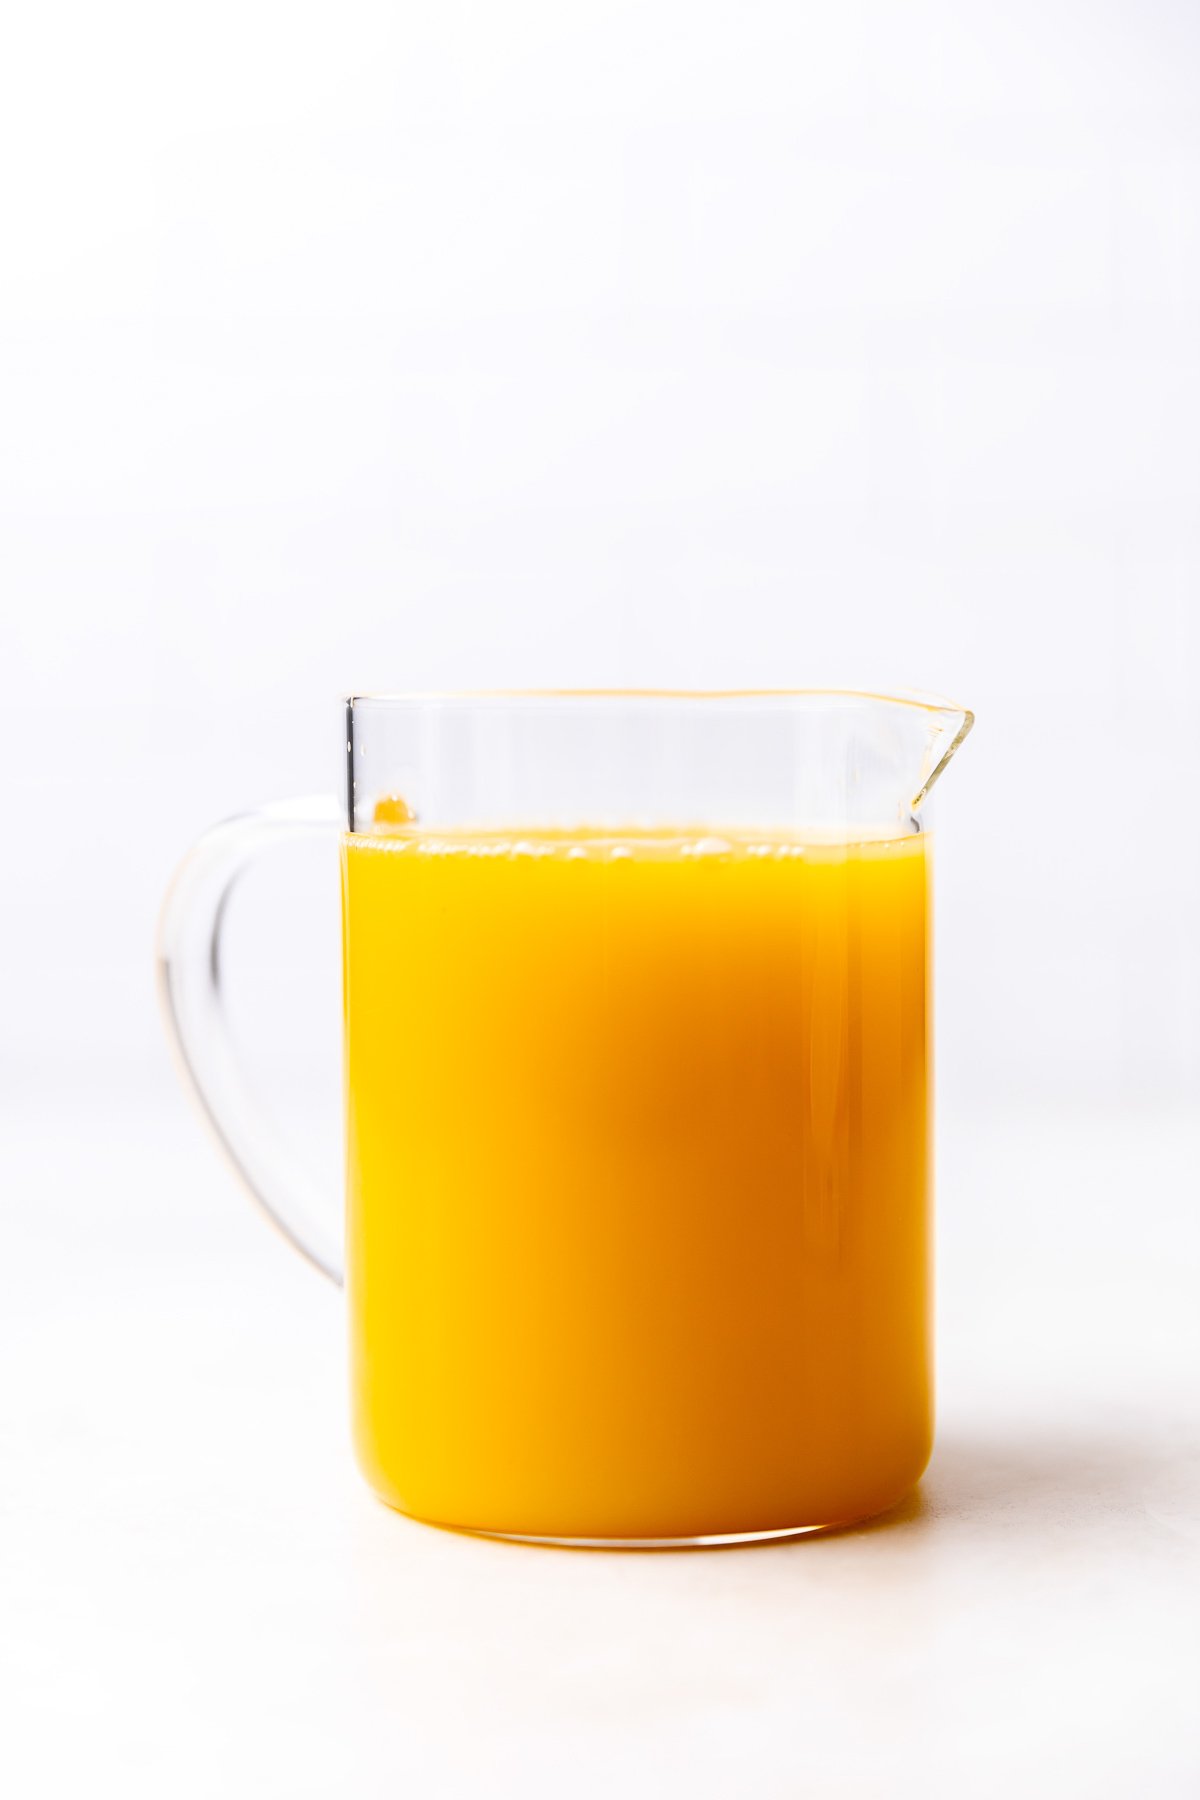 Florida orange juice fills a large glass measuring cup for orange chicken stir fry. The measuring cup rests atop a creamy white textured surface.